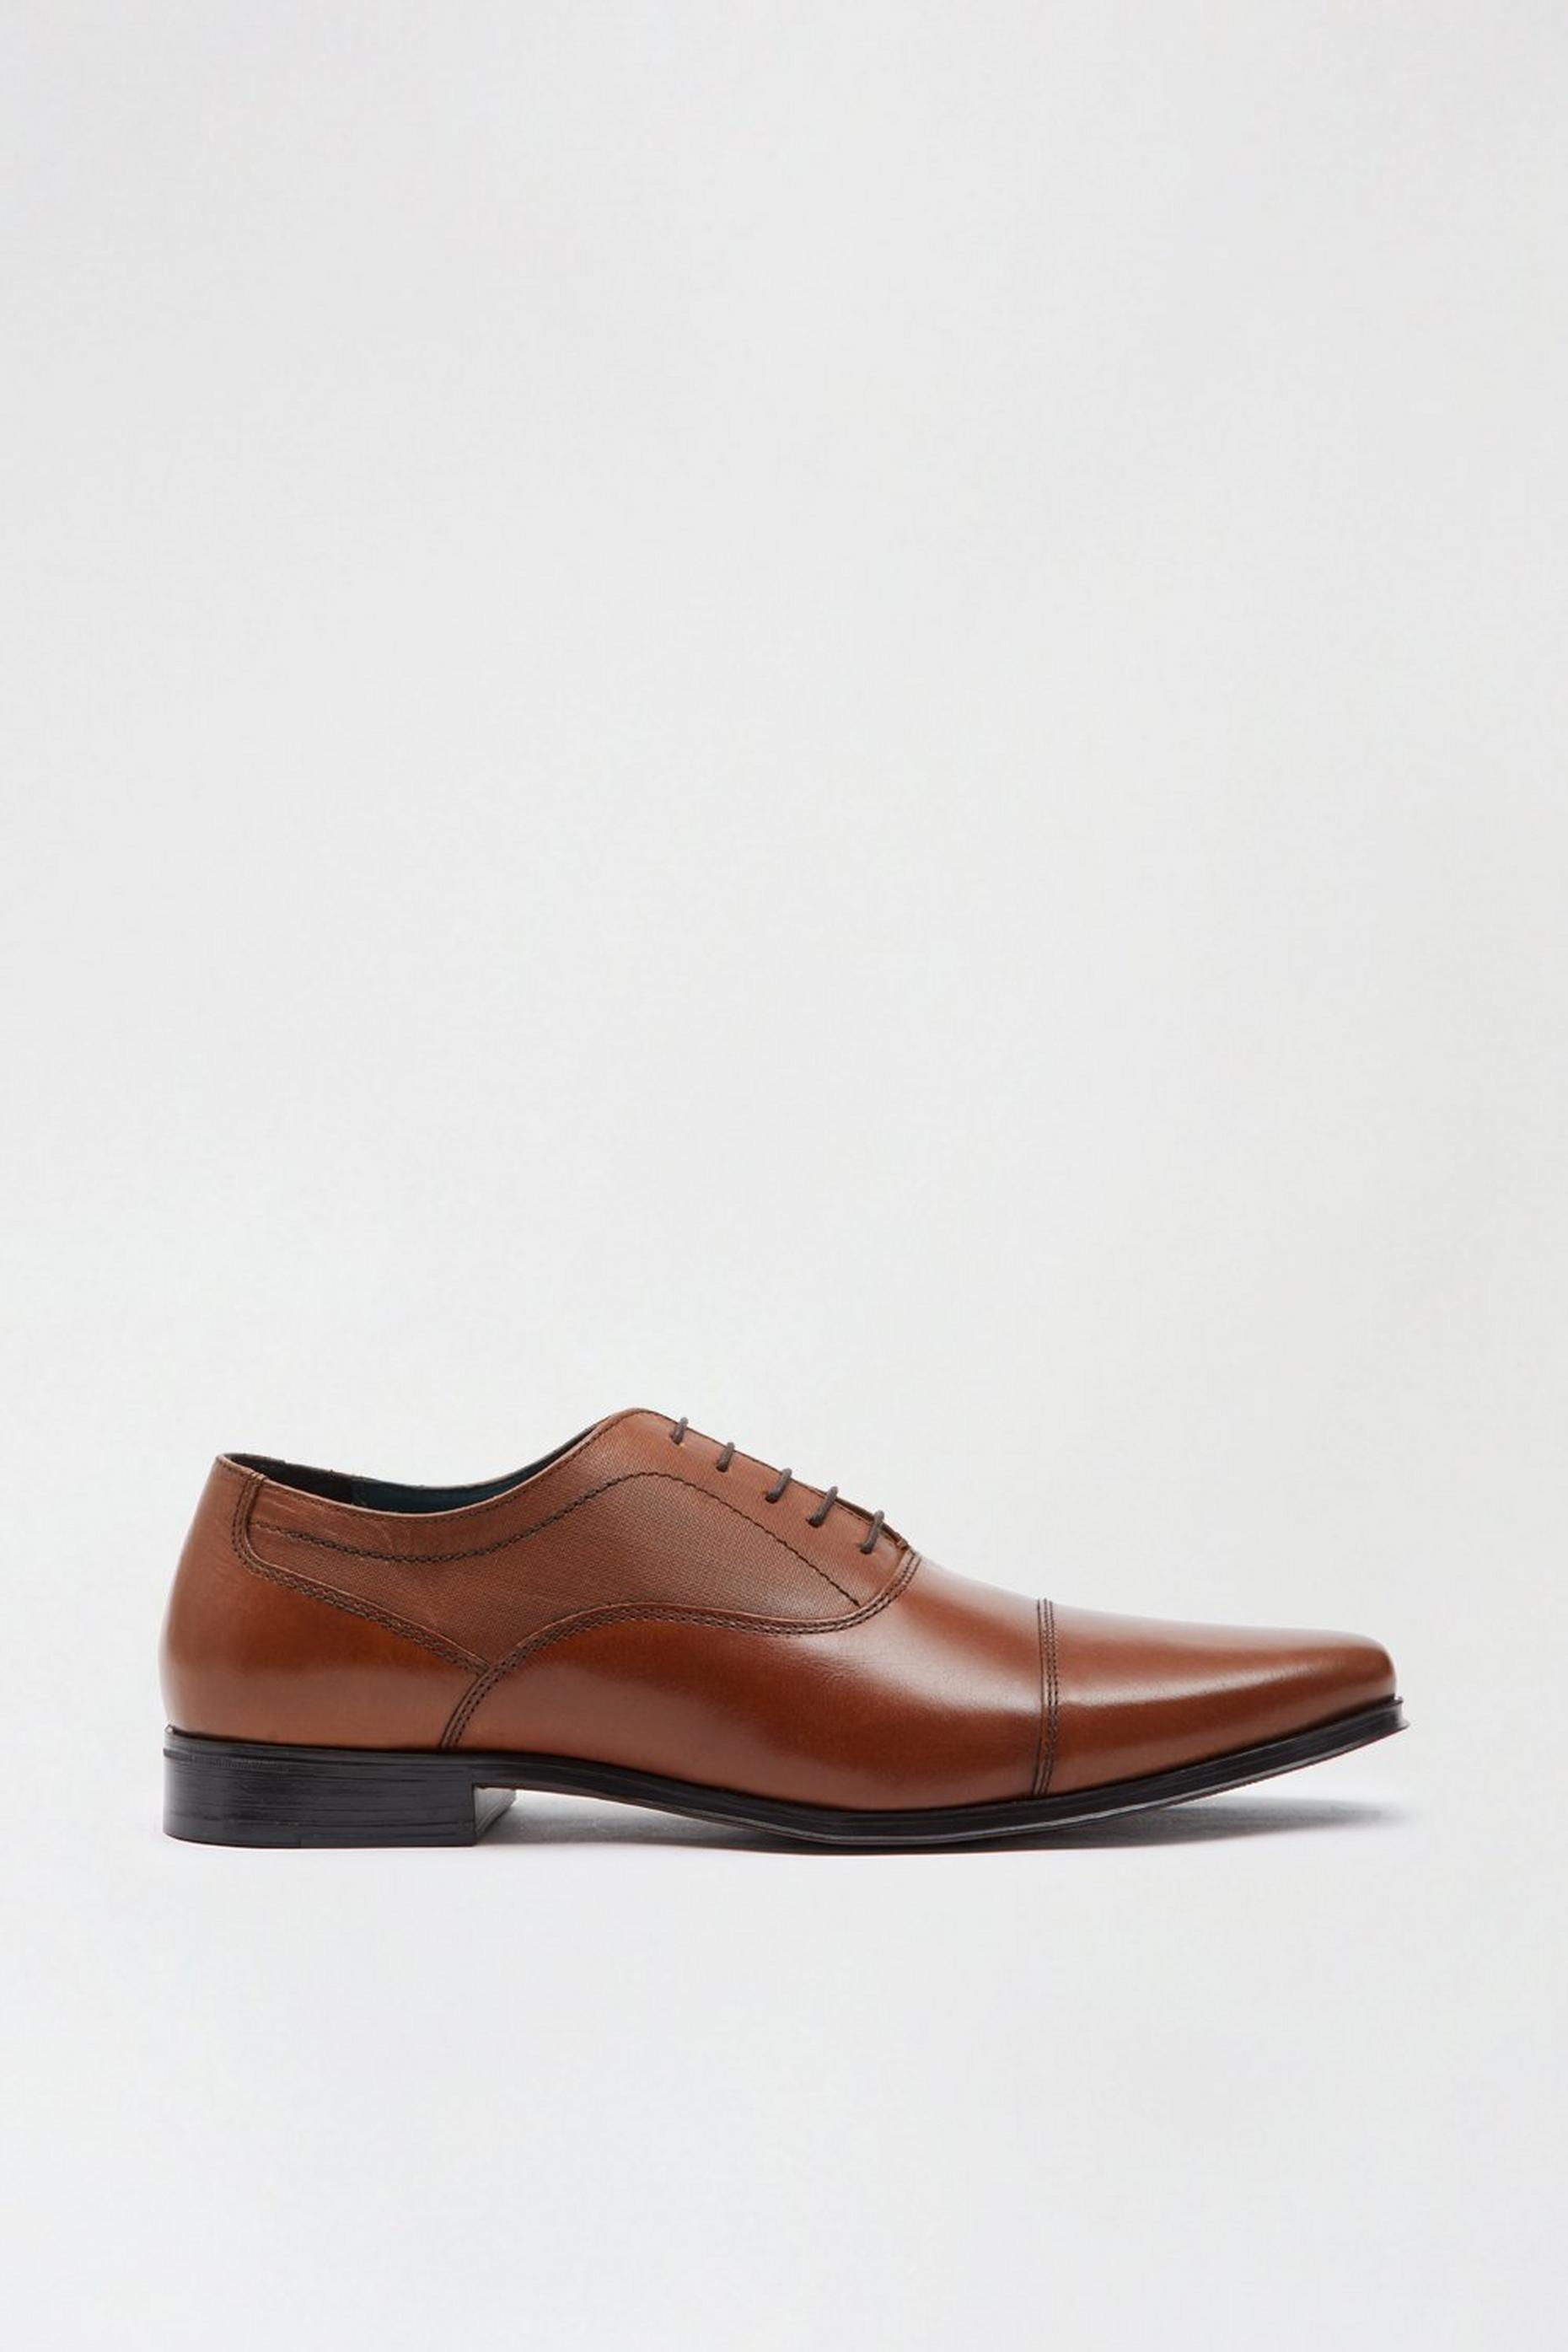 Find amazing products in Men's Formal Shoes today | Burton UK